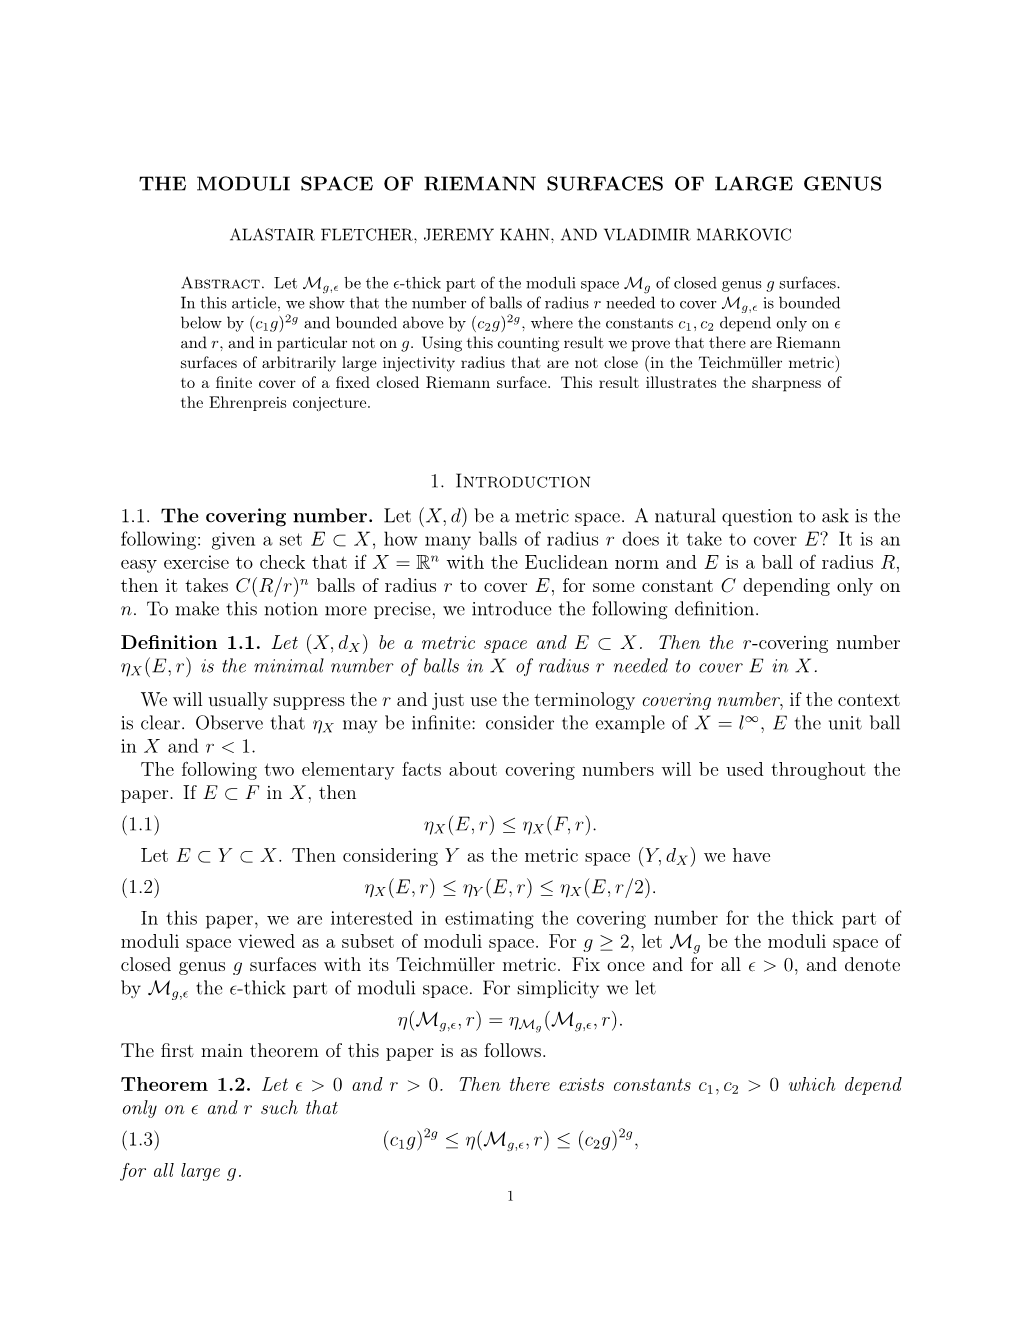 The Moduli Space of Riemann Surfaces of Large Genus